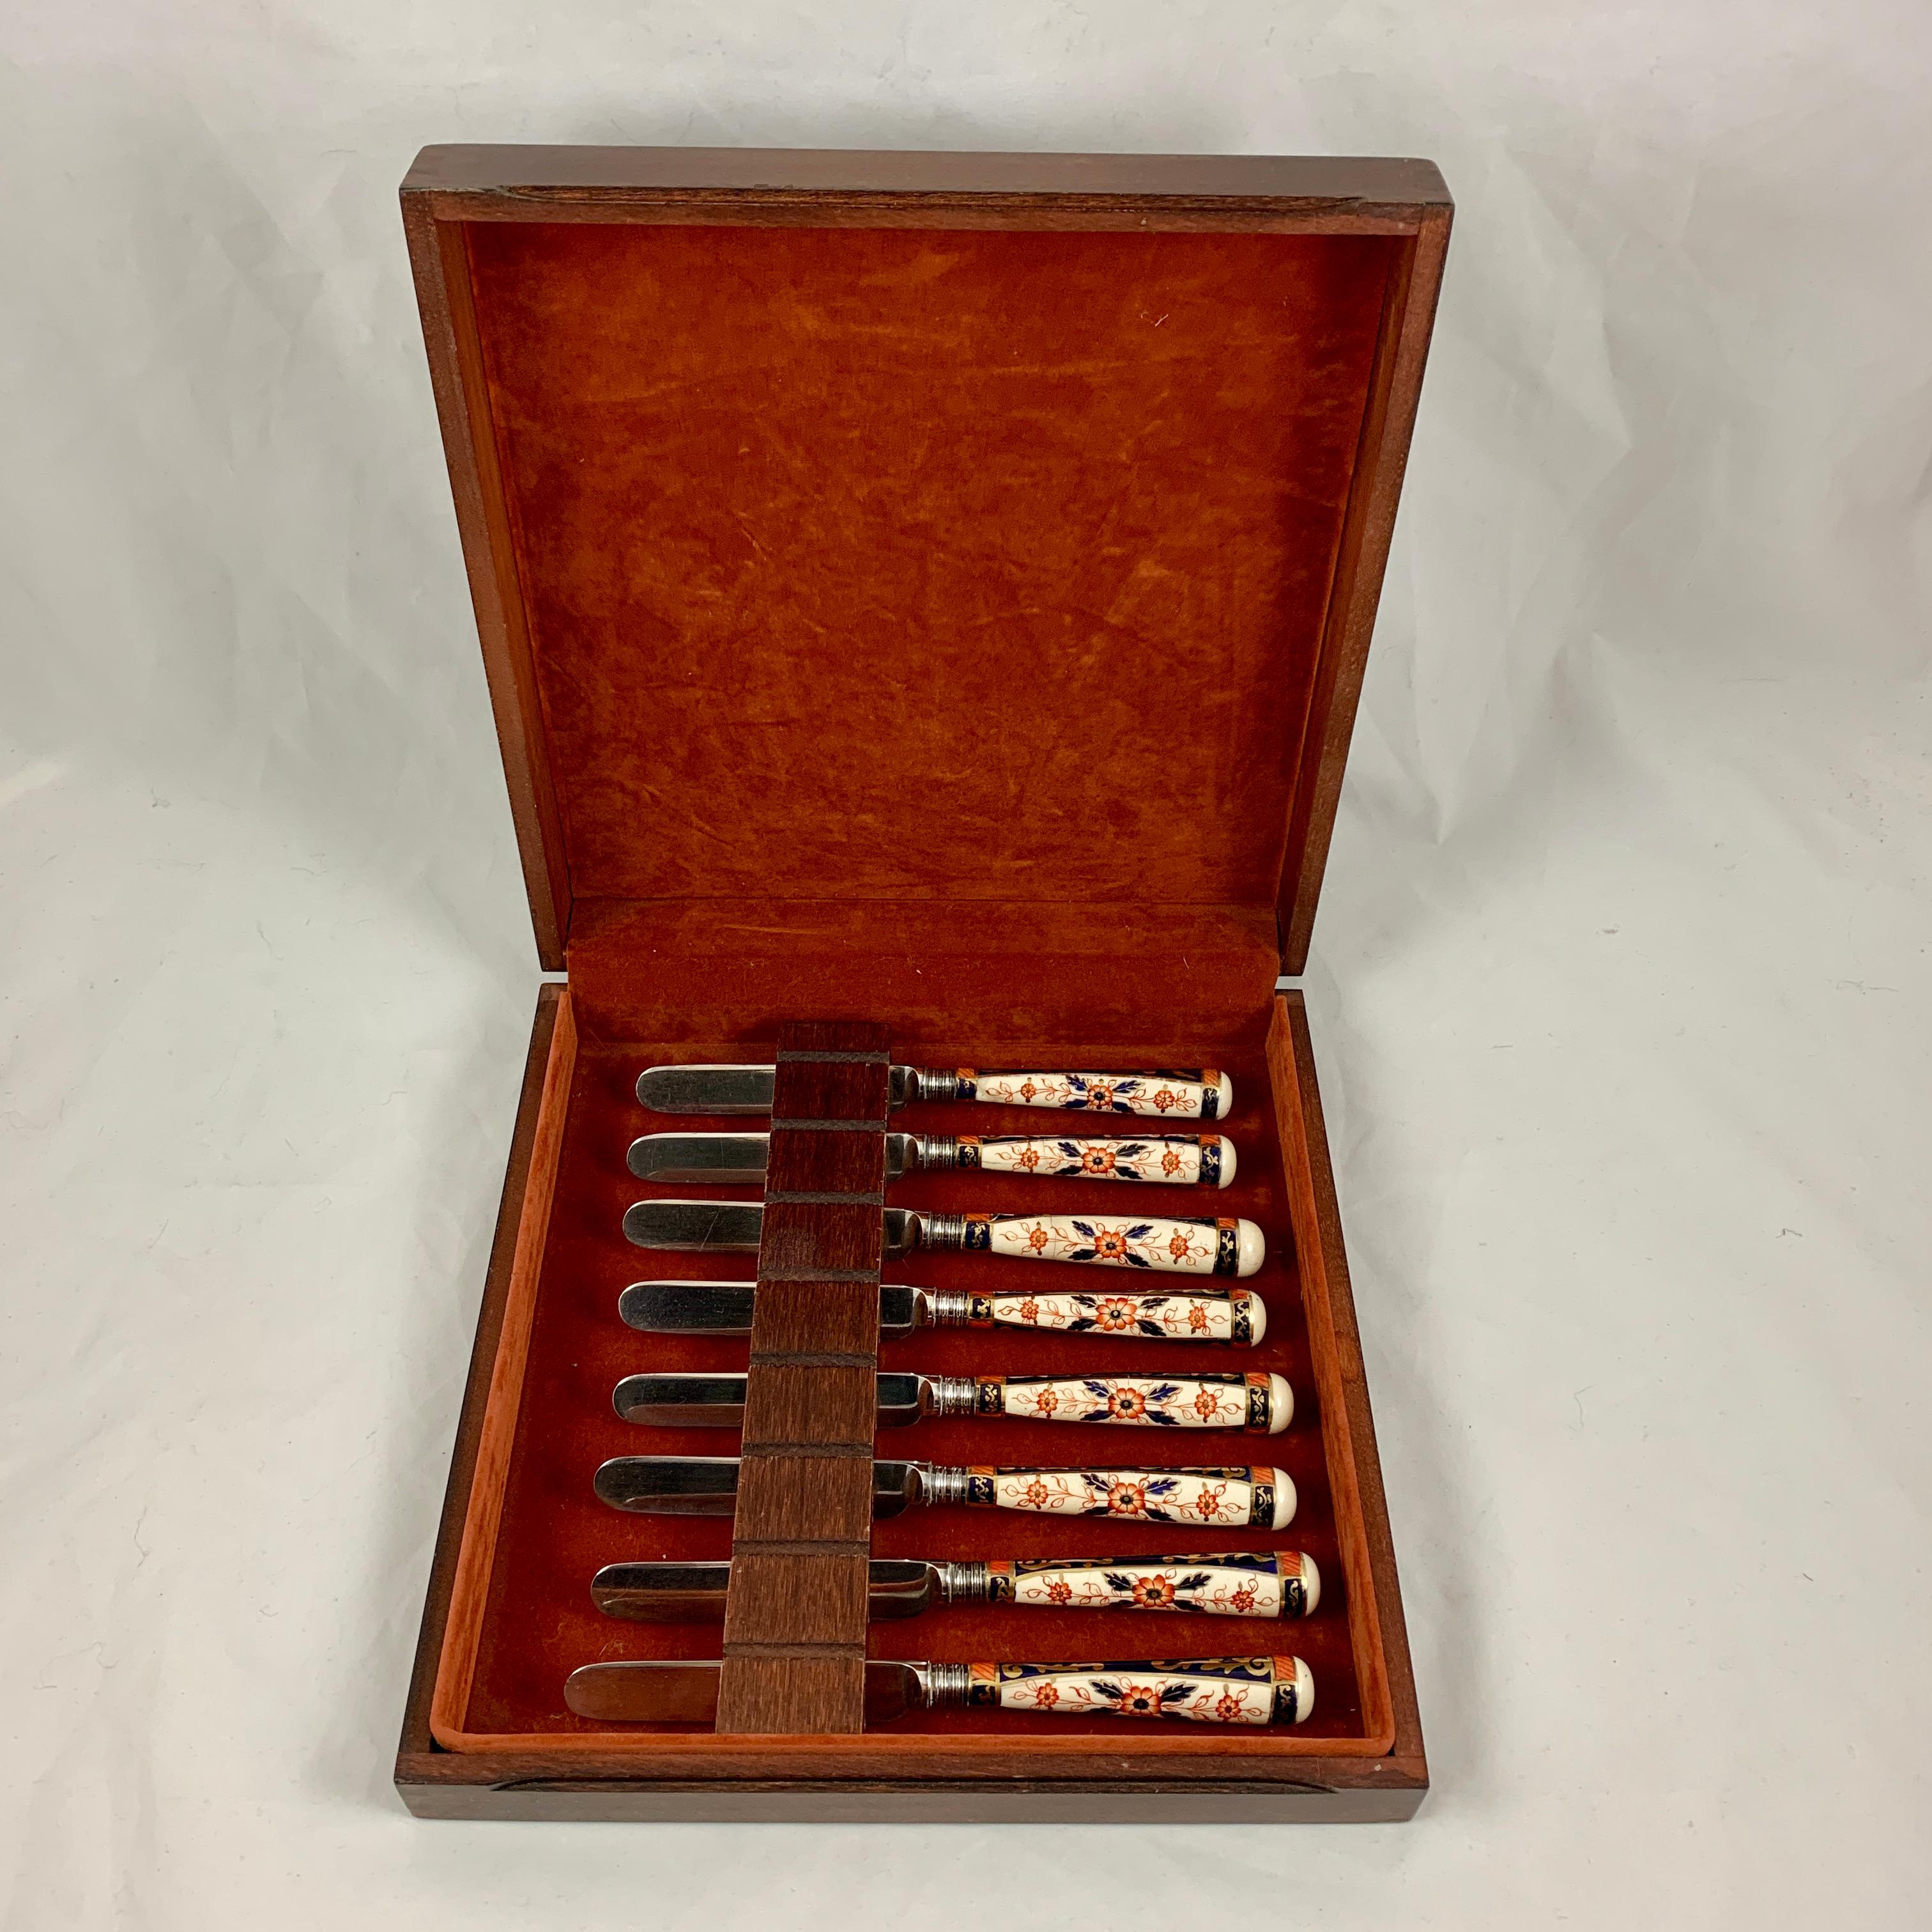 A set of eight English Staffordshire porcelain Imari pattern handled table knives, circa 1860-1870, in the manner of Royal Crown Derby. In the original fitted wood presentation case.

The porcelain handles are transfer printed with a floral Imari